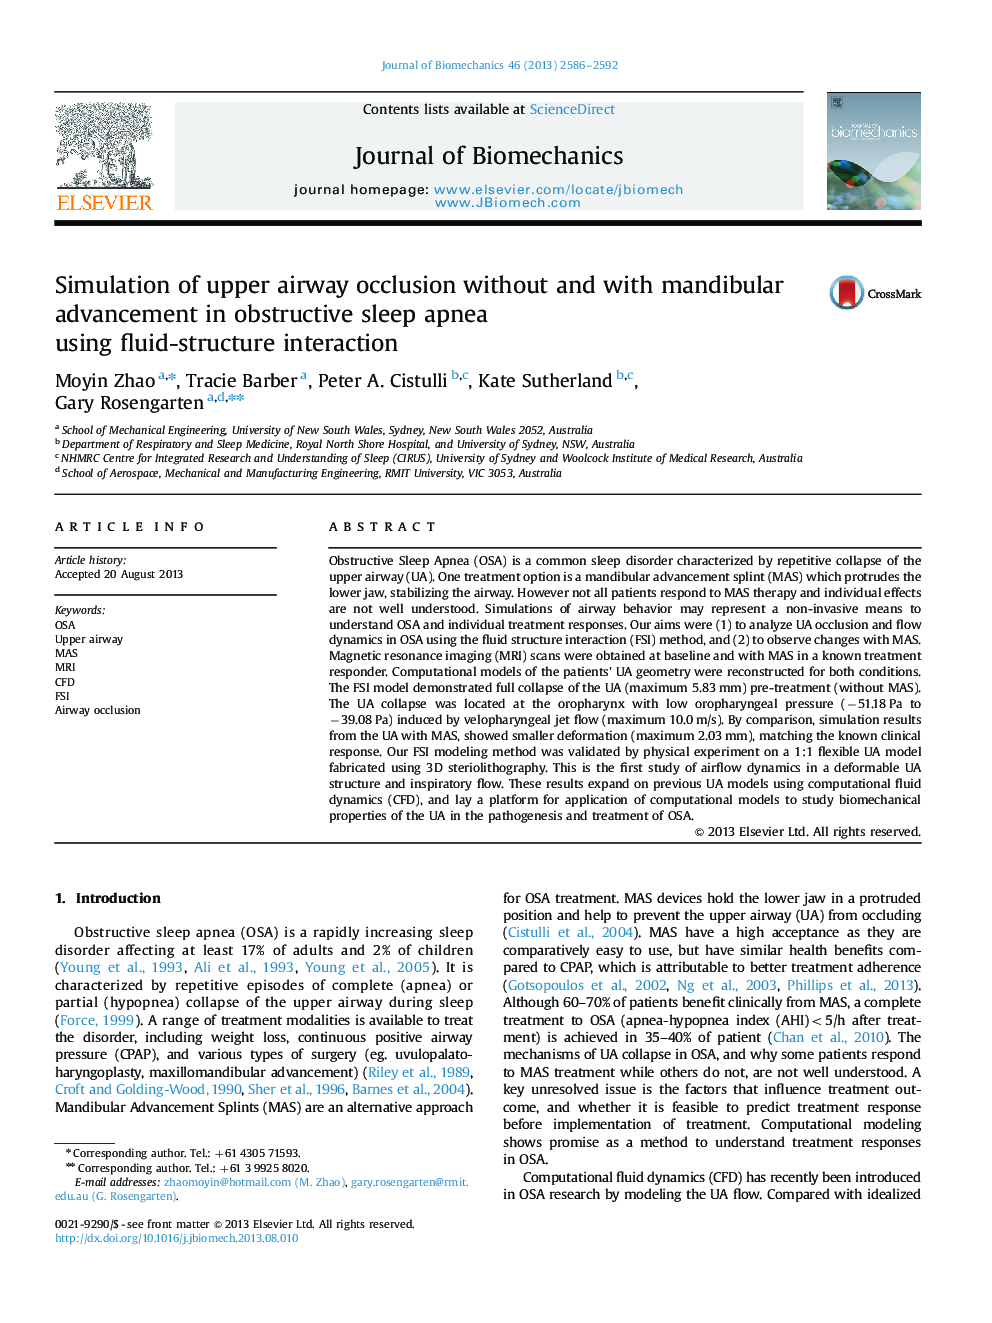 Simulation of upper airway occlusion without and with mandibular advancement in obstructive sleep apnea using fluid-structure interaction